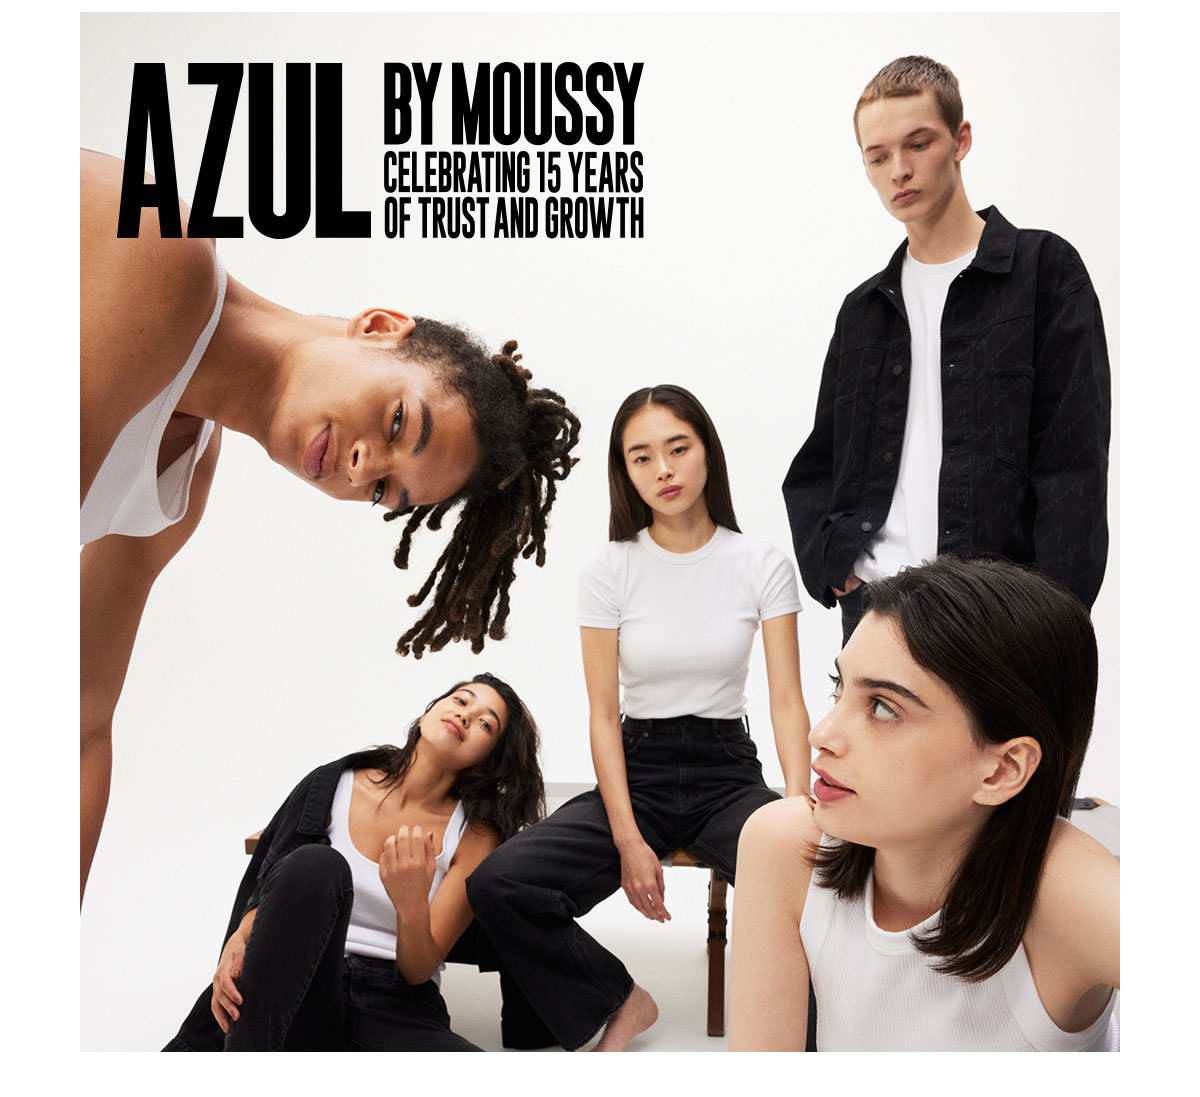 AZUL BY MOUSSY CELEBRATING 15YEARS OF TRUST AND GROWTH